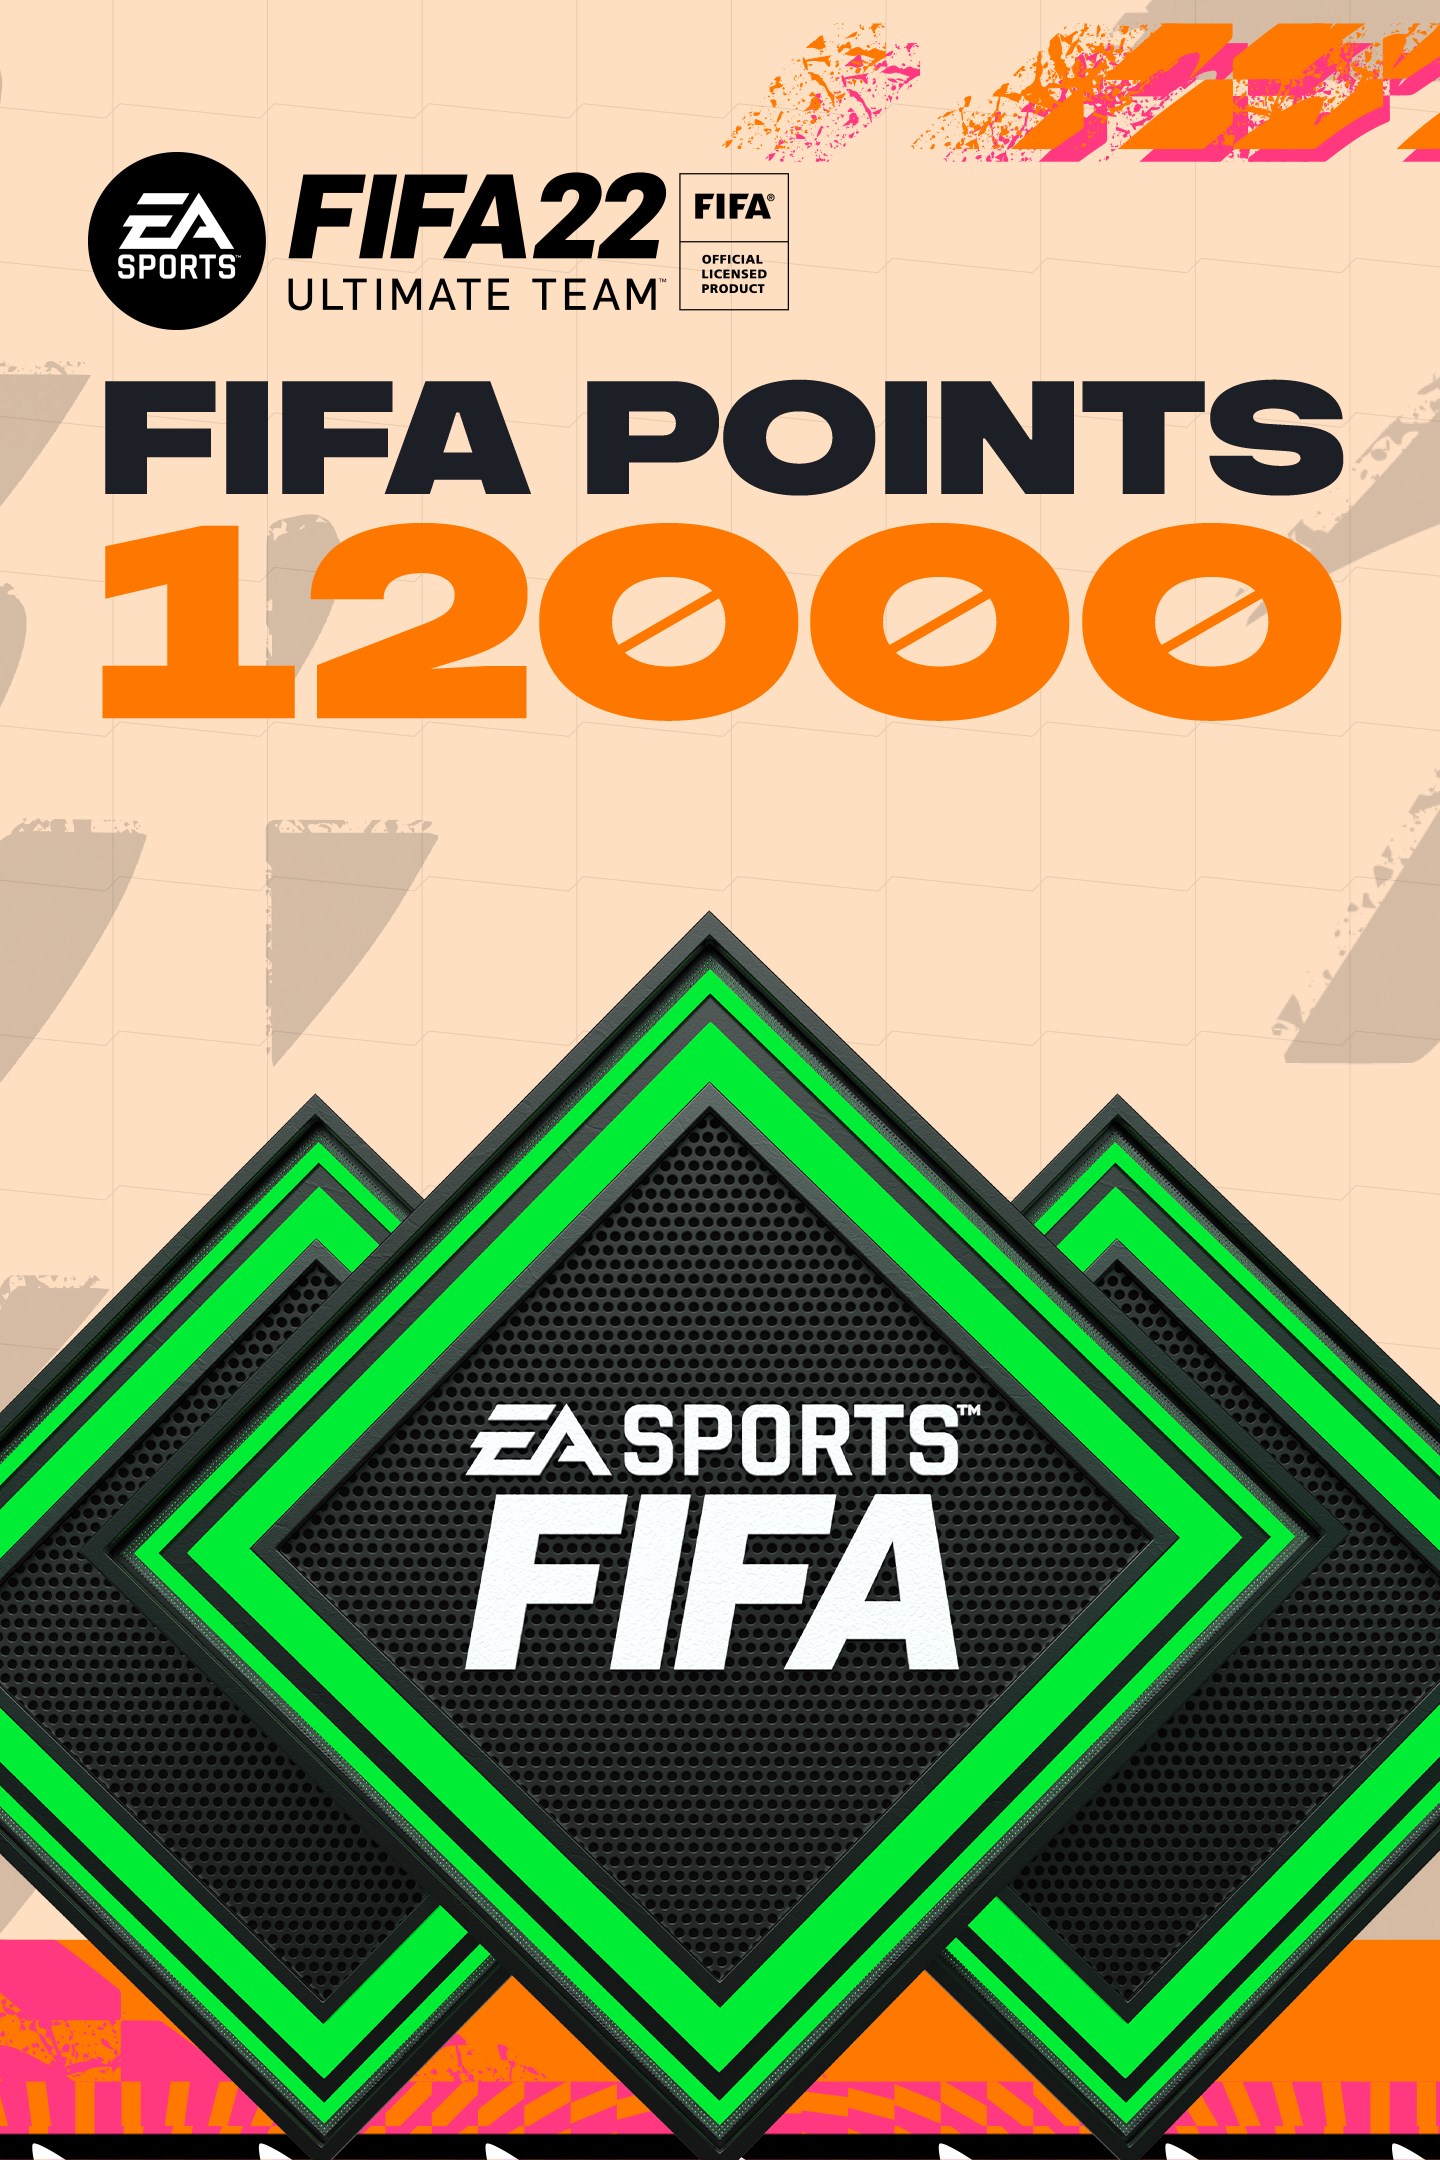 Offer 22. FIFA points. FIFA 23 points Xbox. FUT 22 12000 Xbox. FIFA points 23 PNG.